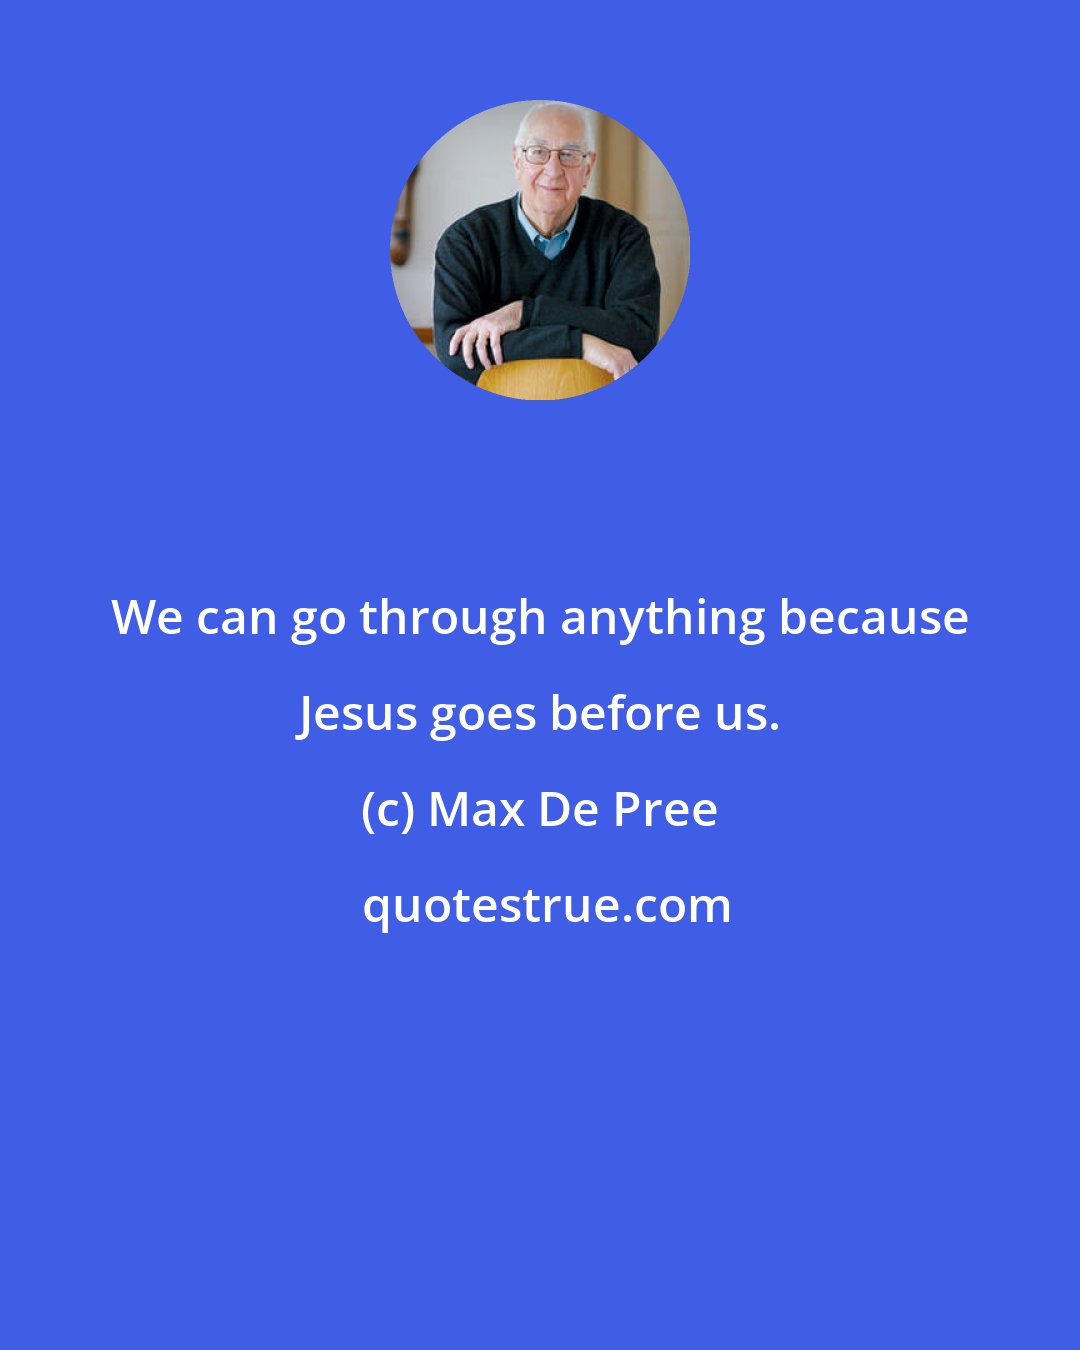 Max De Pree: We can go through anything because Jesus goes before us.